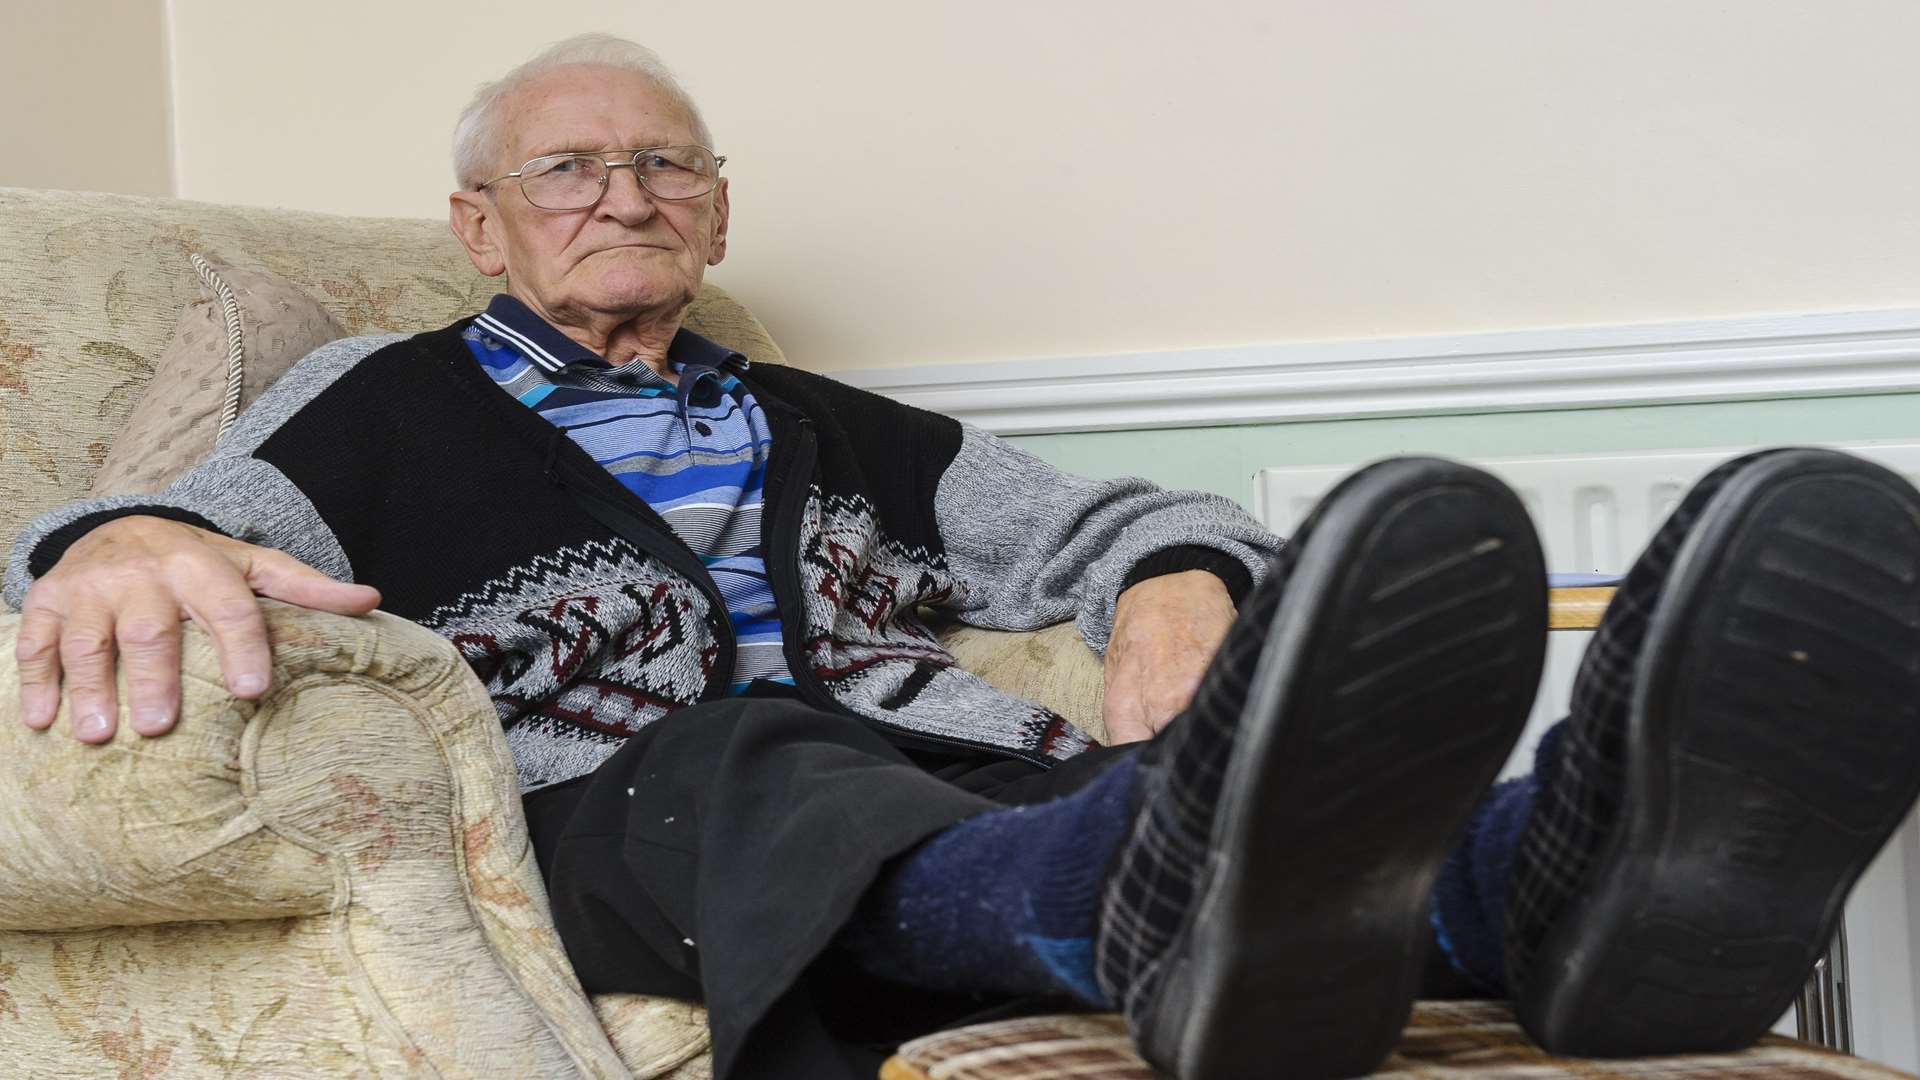 Medway Maritime Hospital have been unable to make Denis Judd shoes that fit properly, which means he has only been able to wear slippers for nearly two years. Picture: Andy Payton